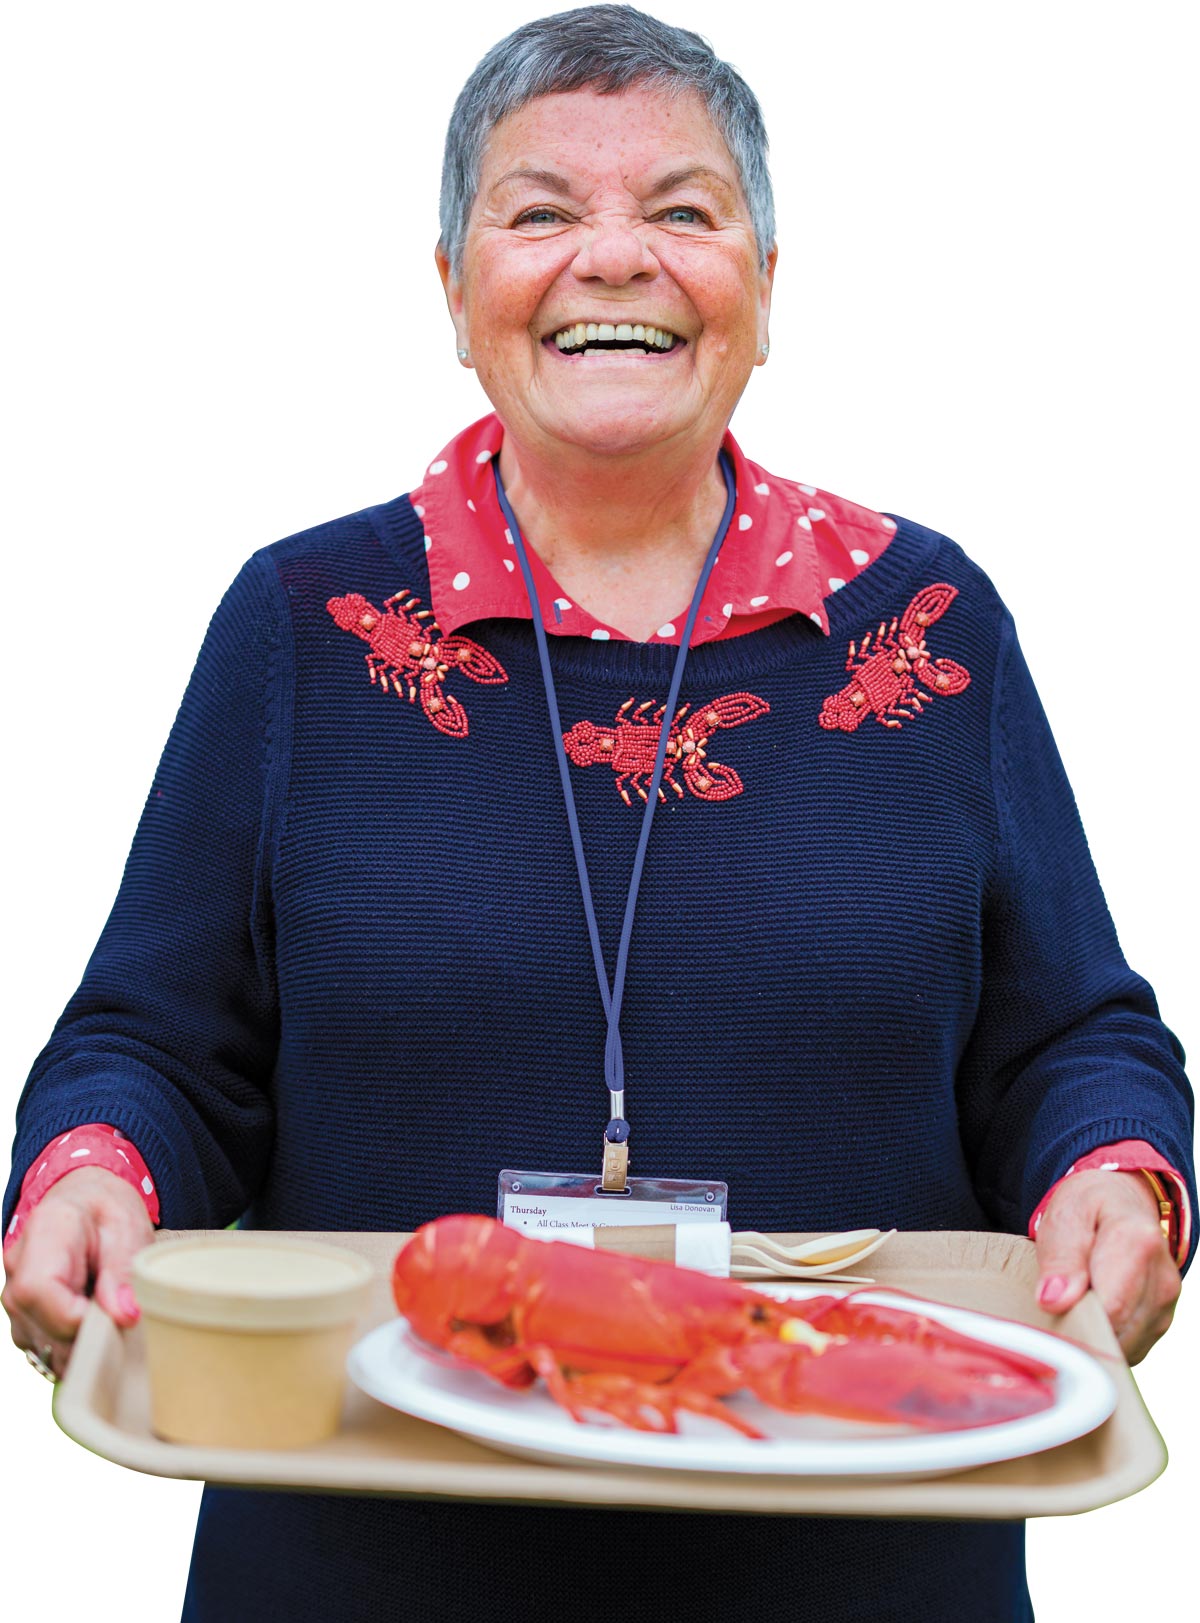 Lisa (Wegener) Donovan ’67 was all smiles at the Lobster Bake during Reunion Weekend. See more photos and coverage of Reunion